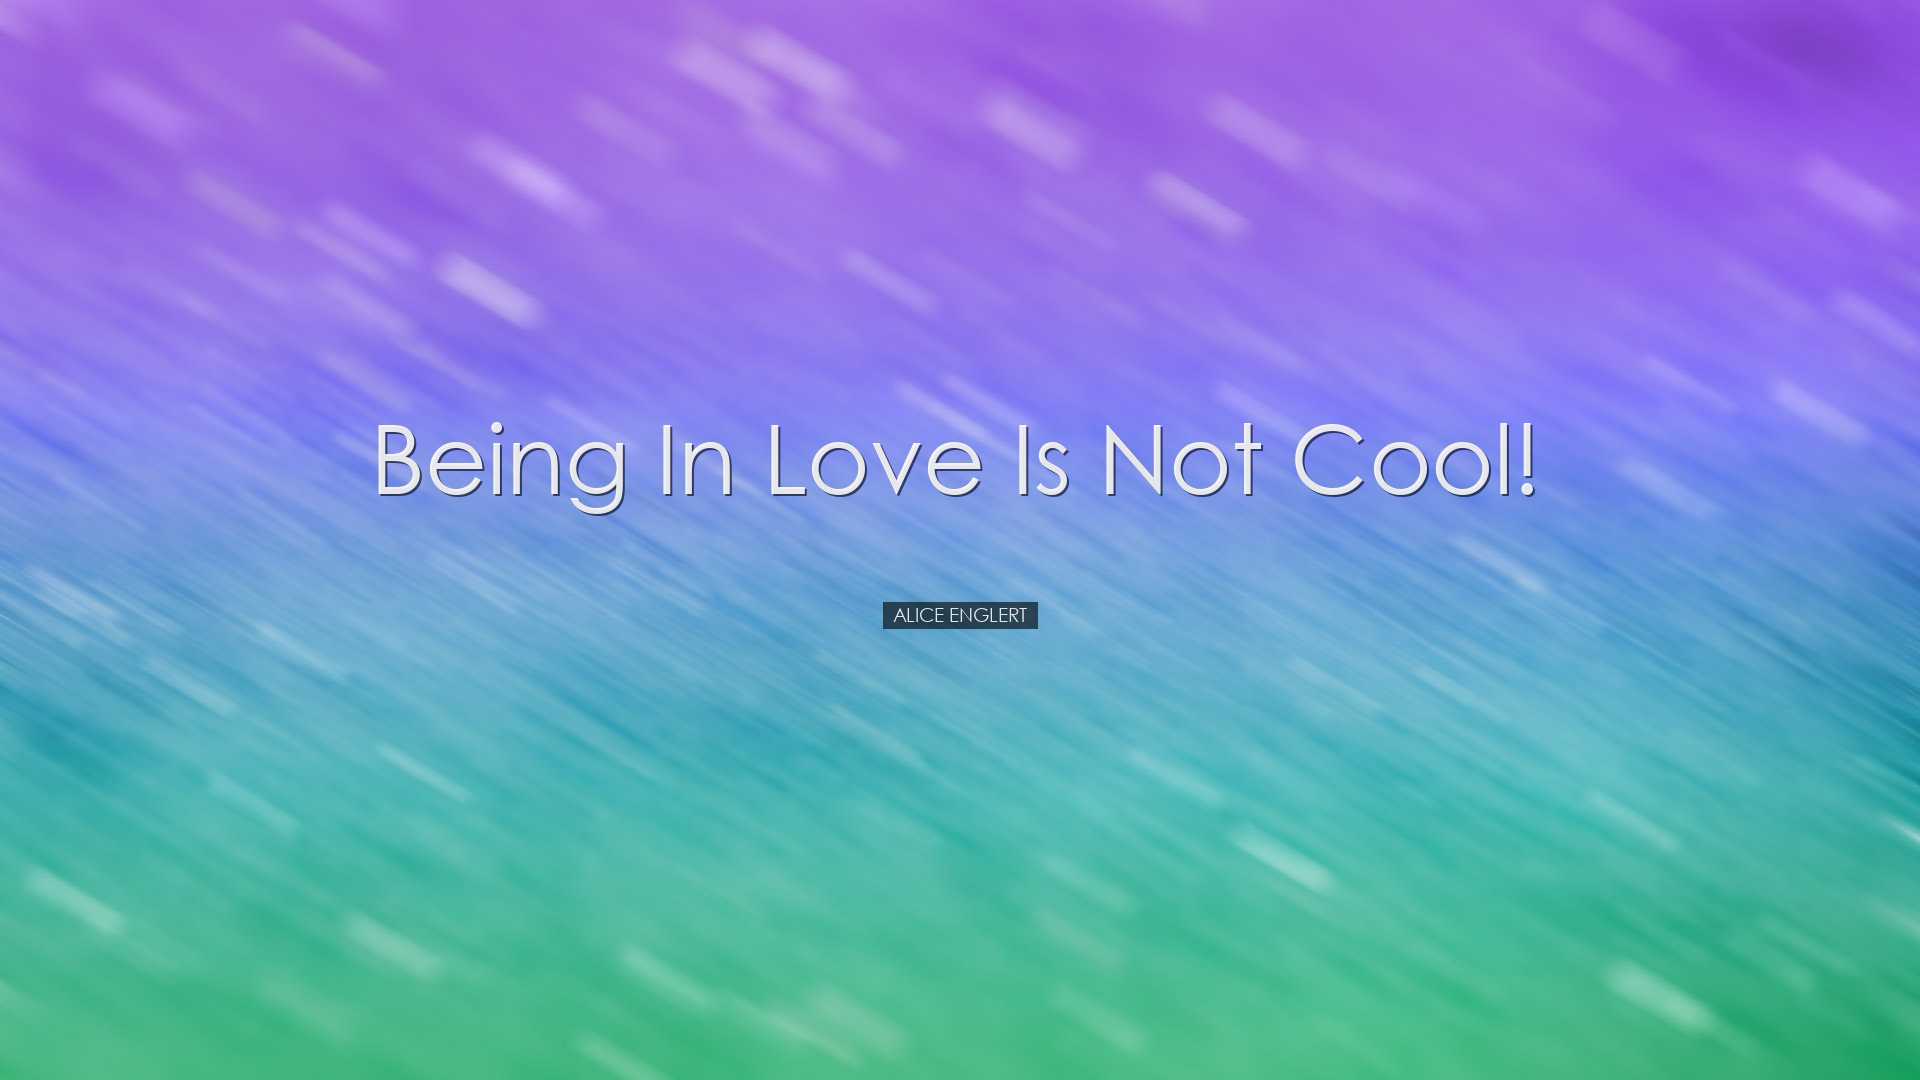 Being in love is not cool! - Alice Englert